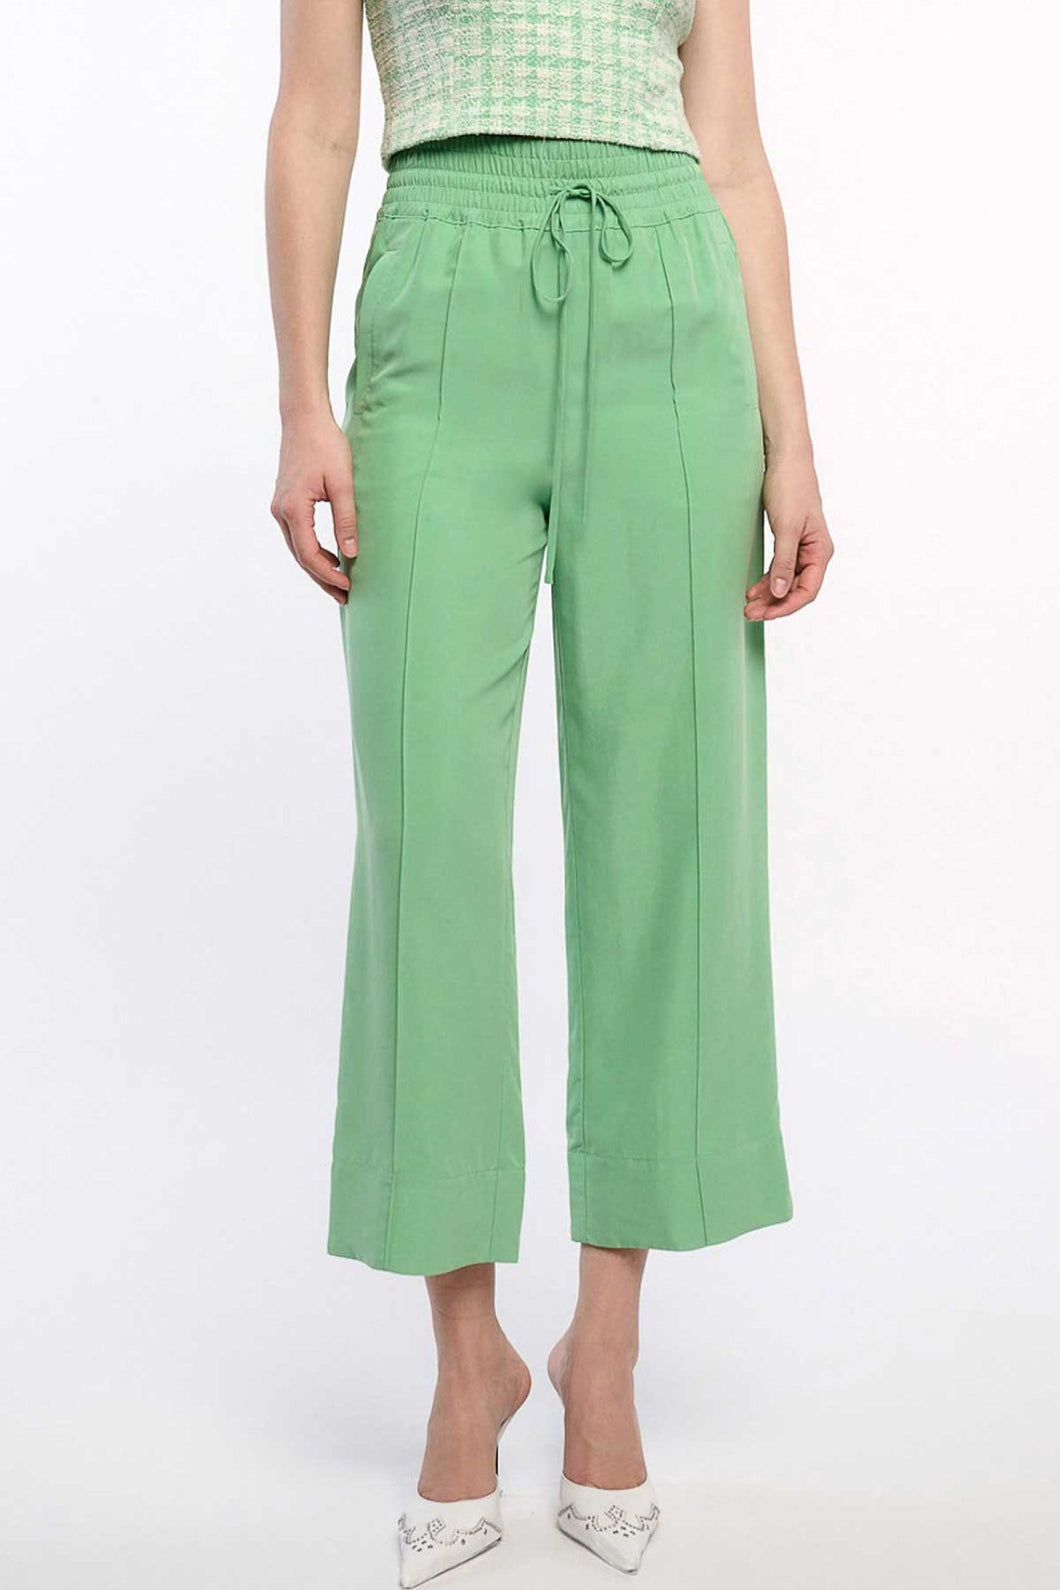 Apple Green High Waisted Pintuck Pull Over Pants